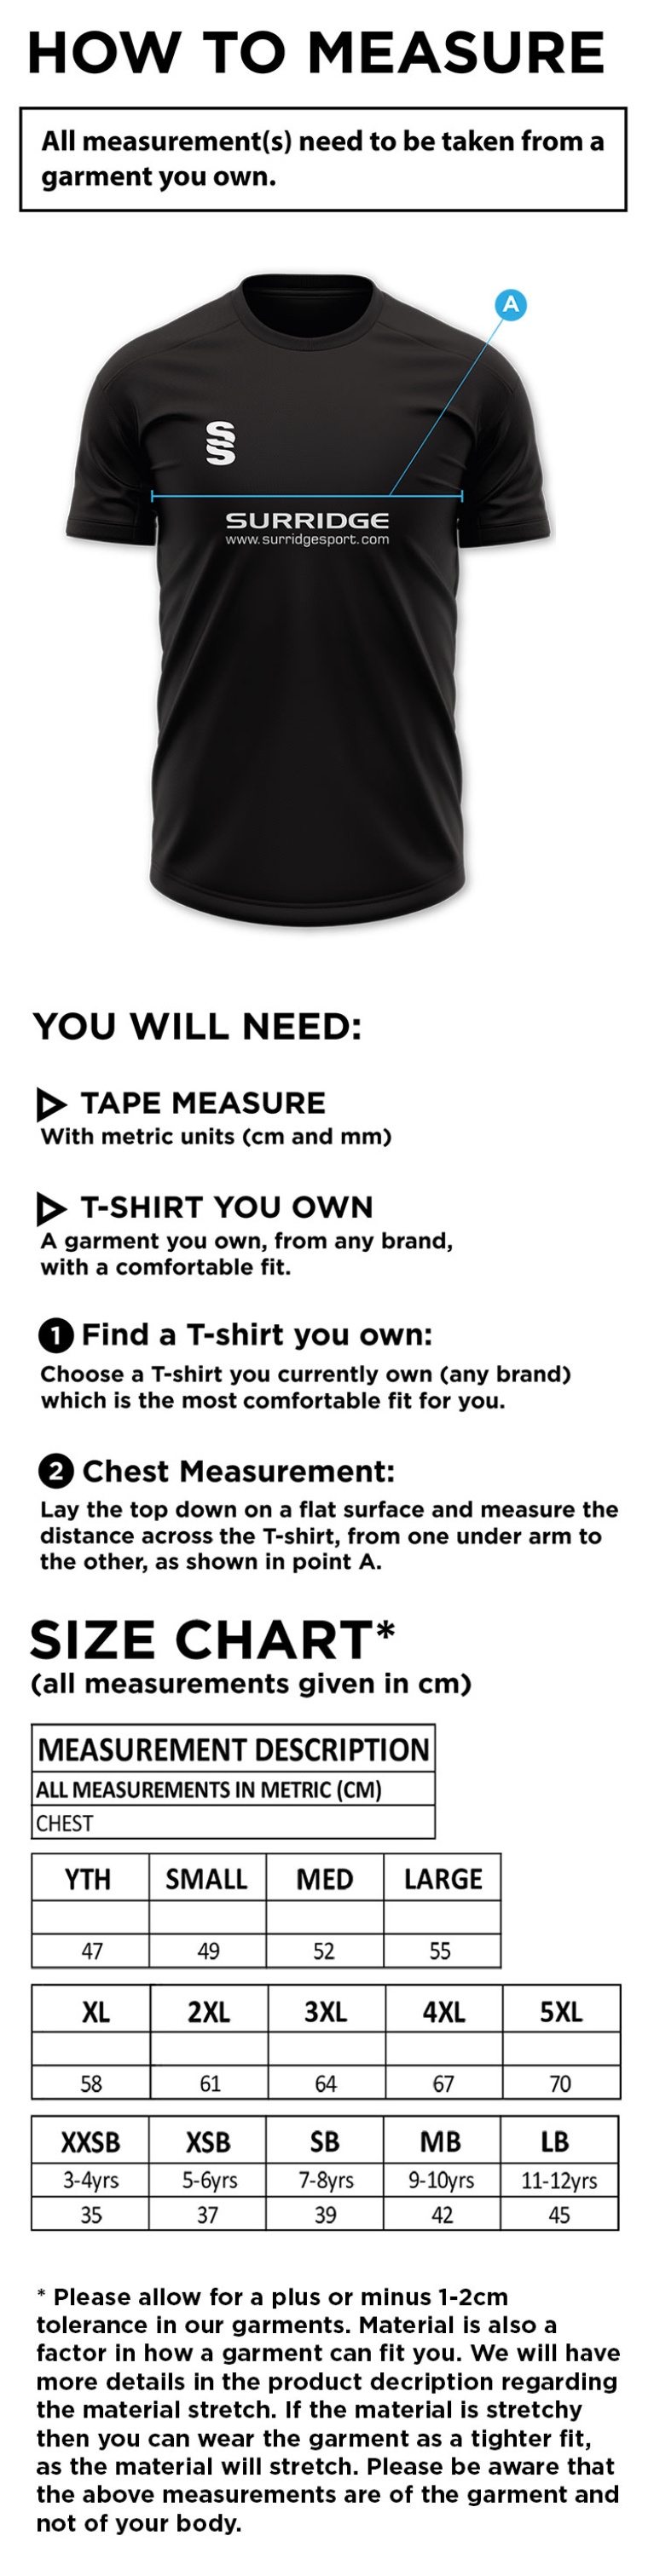 Youth's Dual Games Shirt : Bottle - Size Guide